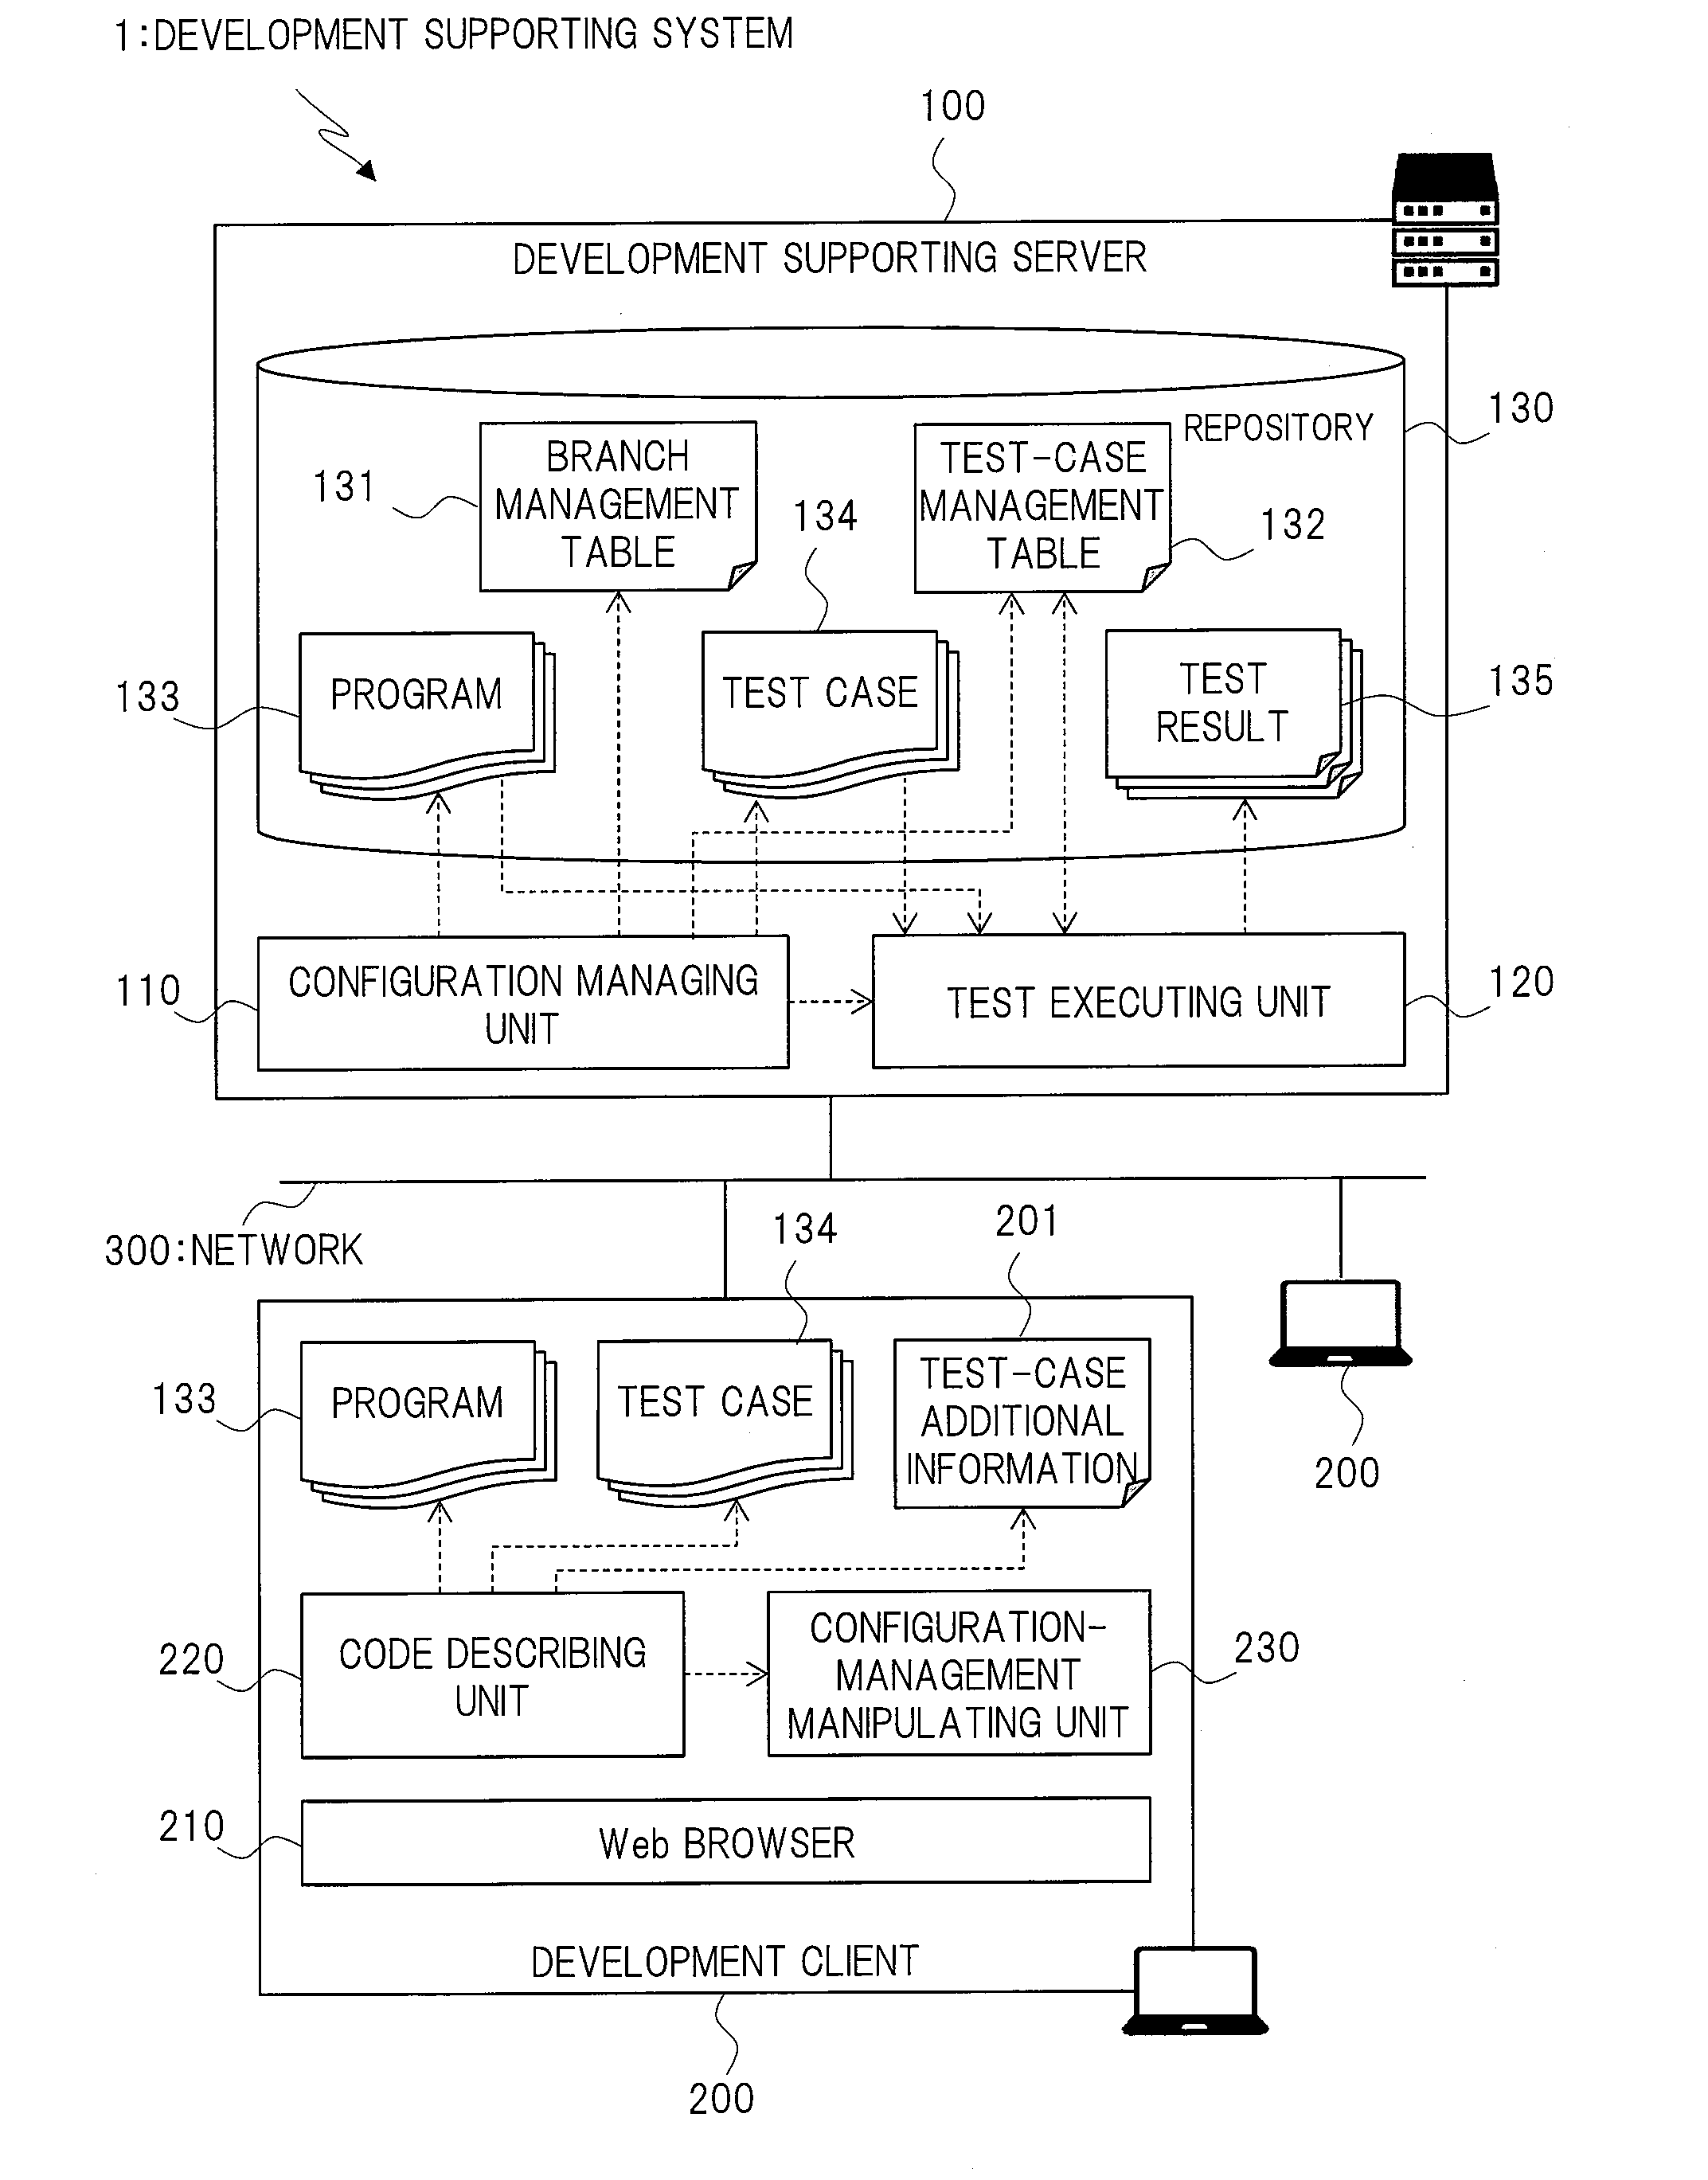 Development supporting system